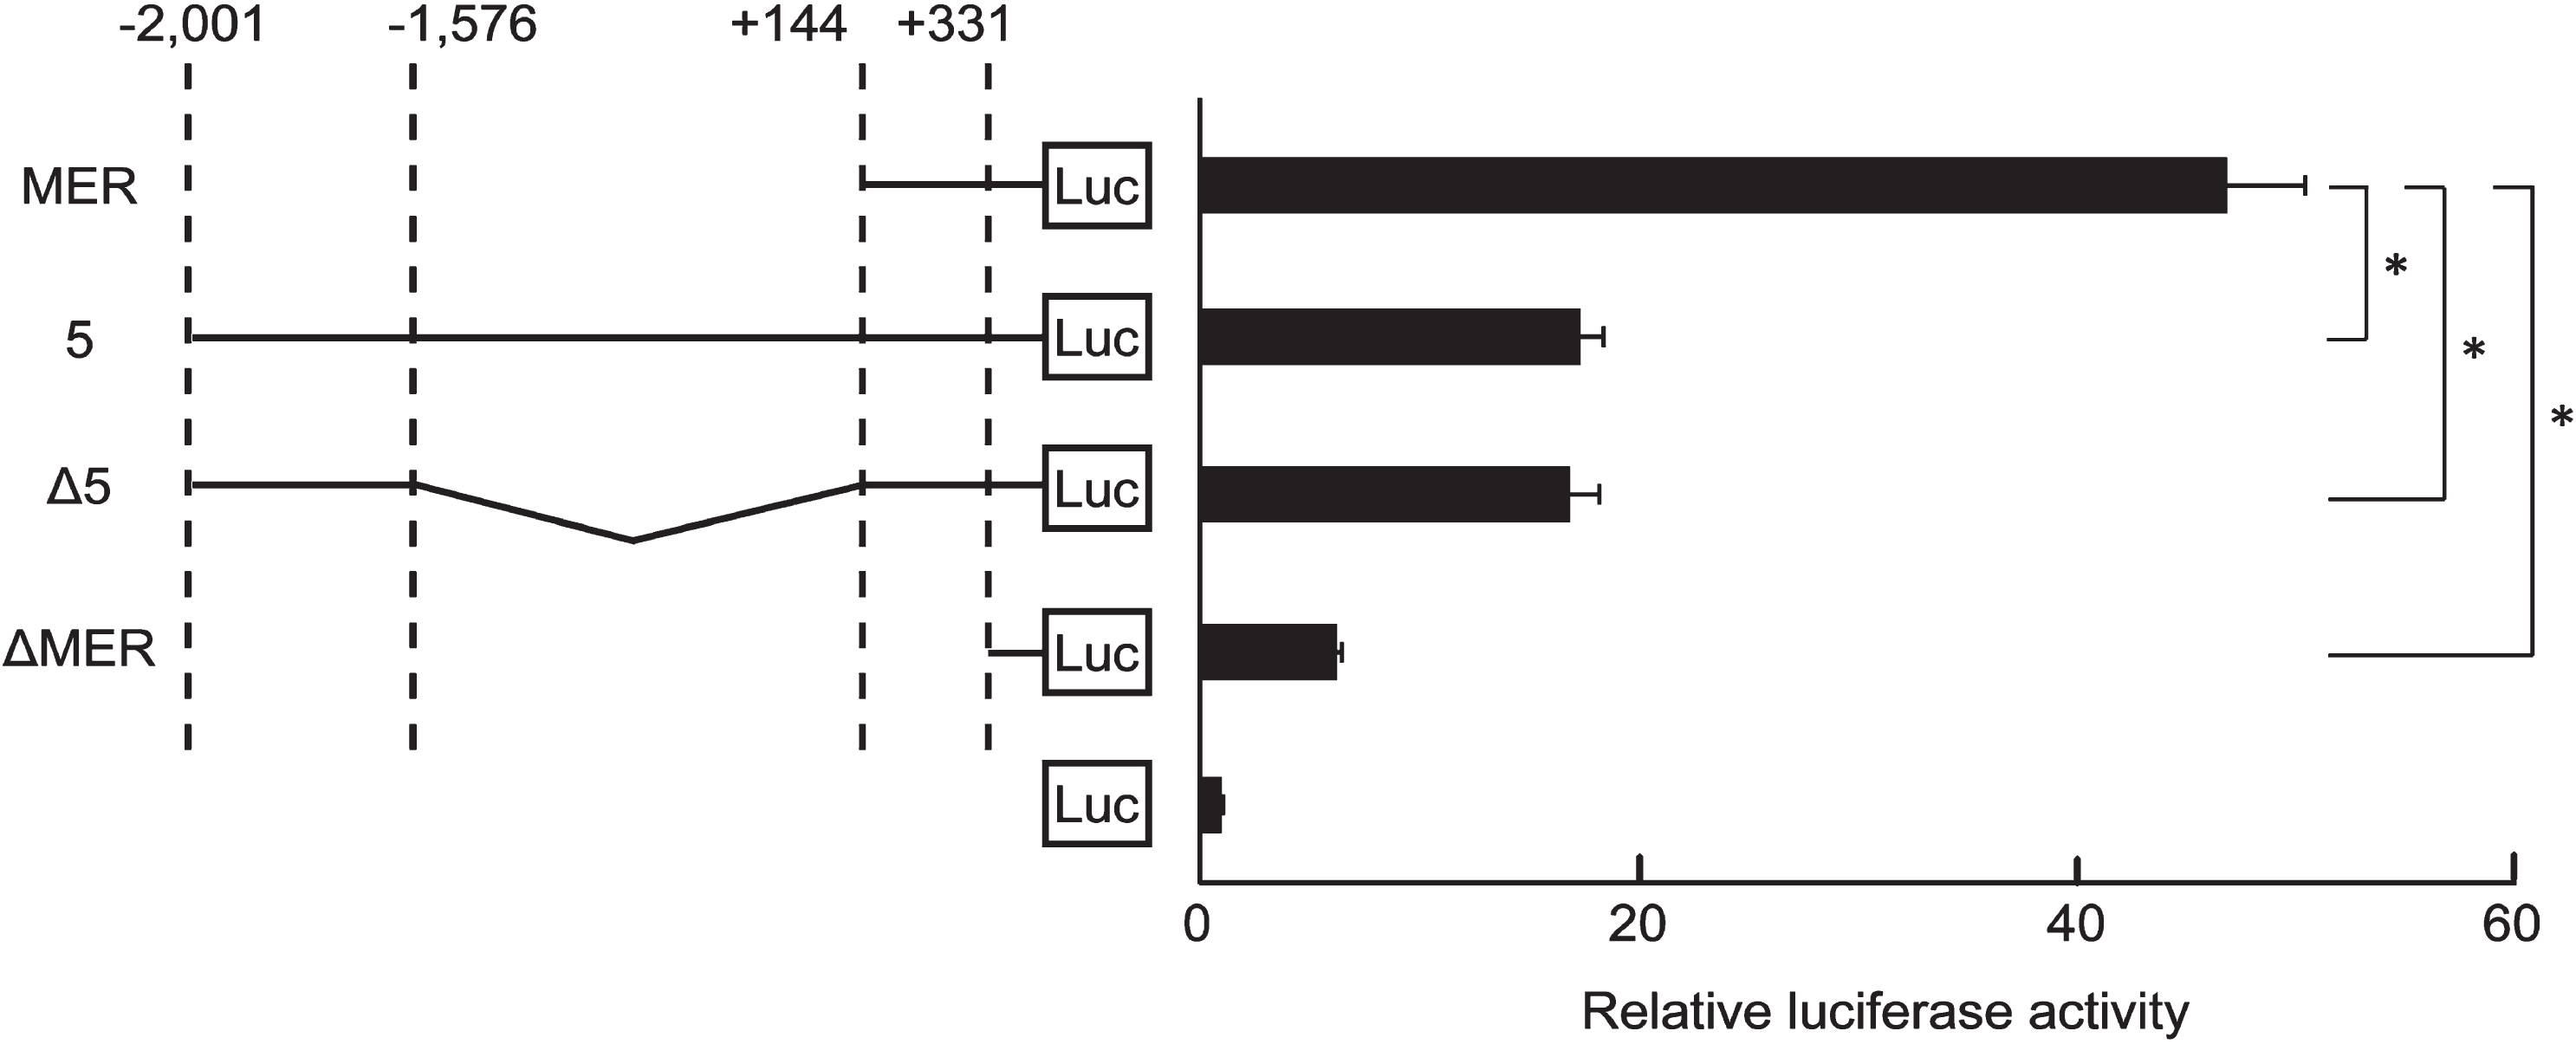 The inhibition of MER activity of KLF5 gene by the 425-region. Clones containing MER of KLF5 gene or other fragments were transfected into HSC2 cells. RLA were normalized by renilla control plasmid. Clone Δ5 was a construct that ligated the 425-region (-2,001 to -1,577) and the MER (+145 to+331). Clone MER and clone ΔMER were constructs that contained the MER and deleted the MER from clone MER, respectively. The data are presented as means±SD of quadruplicate experiments (n = 4). *, P < 0.05 compared to clone MER.